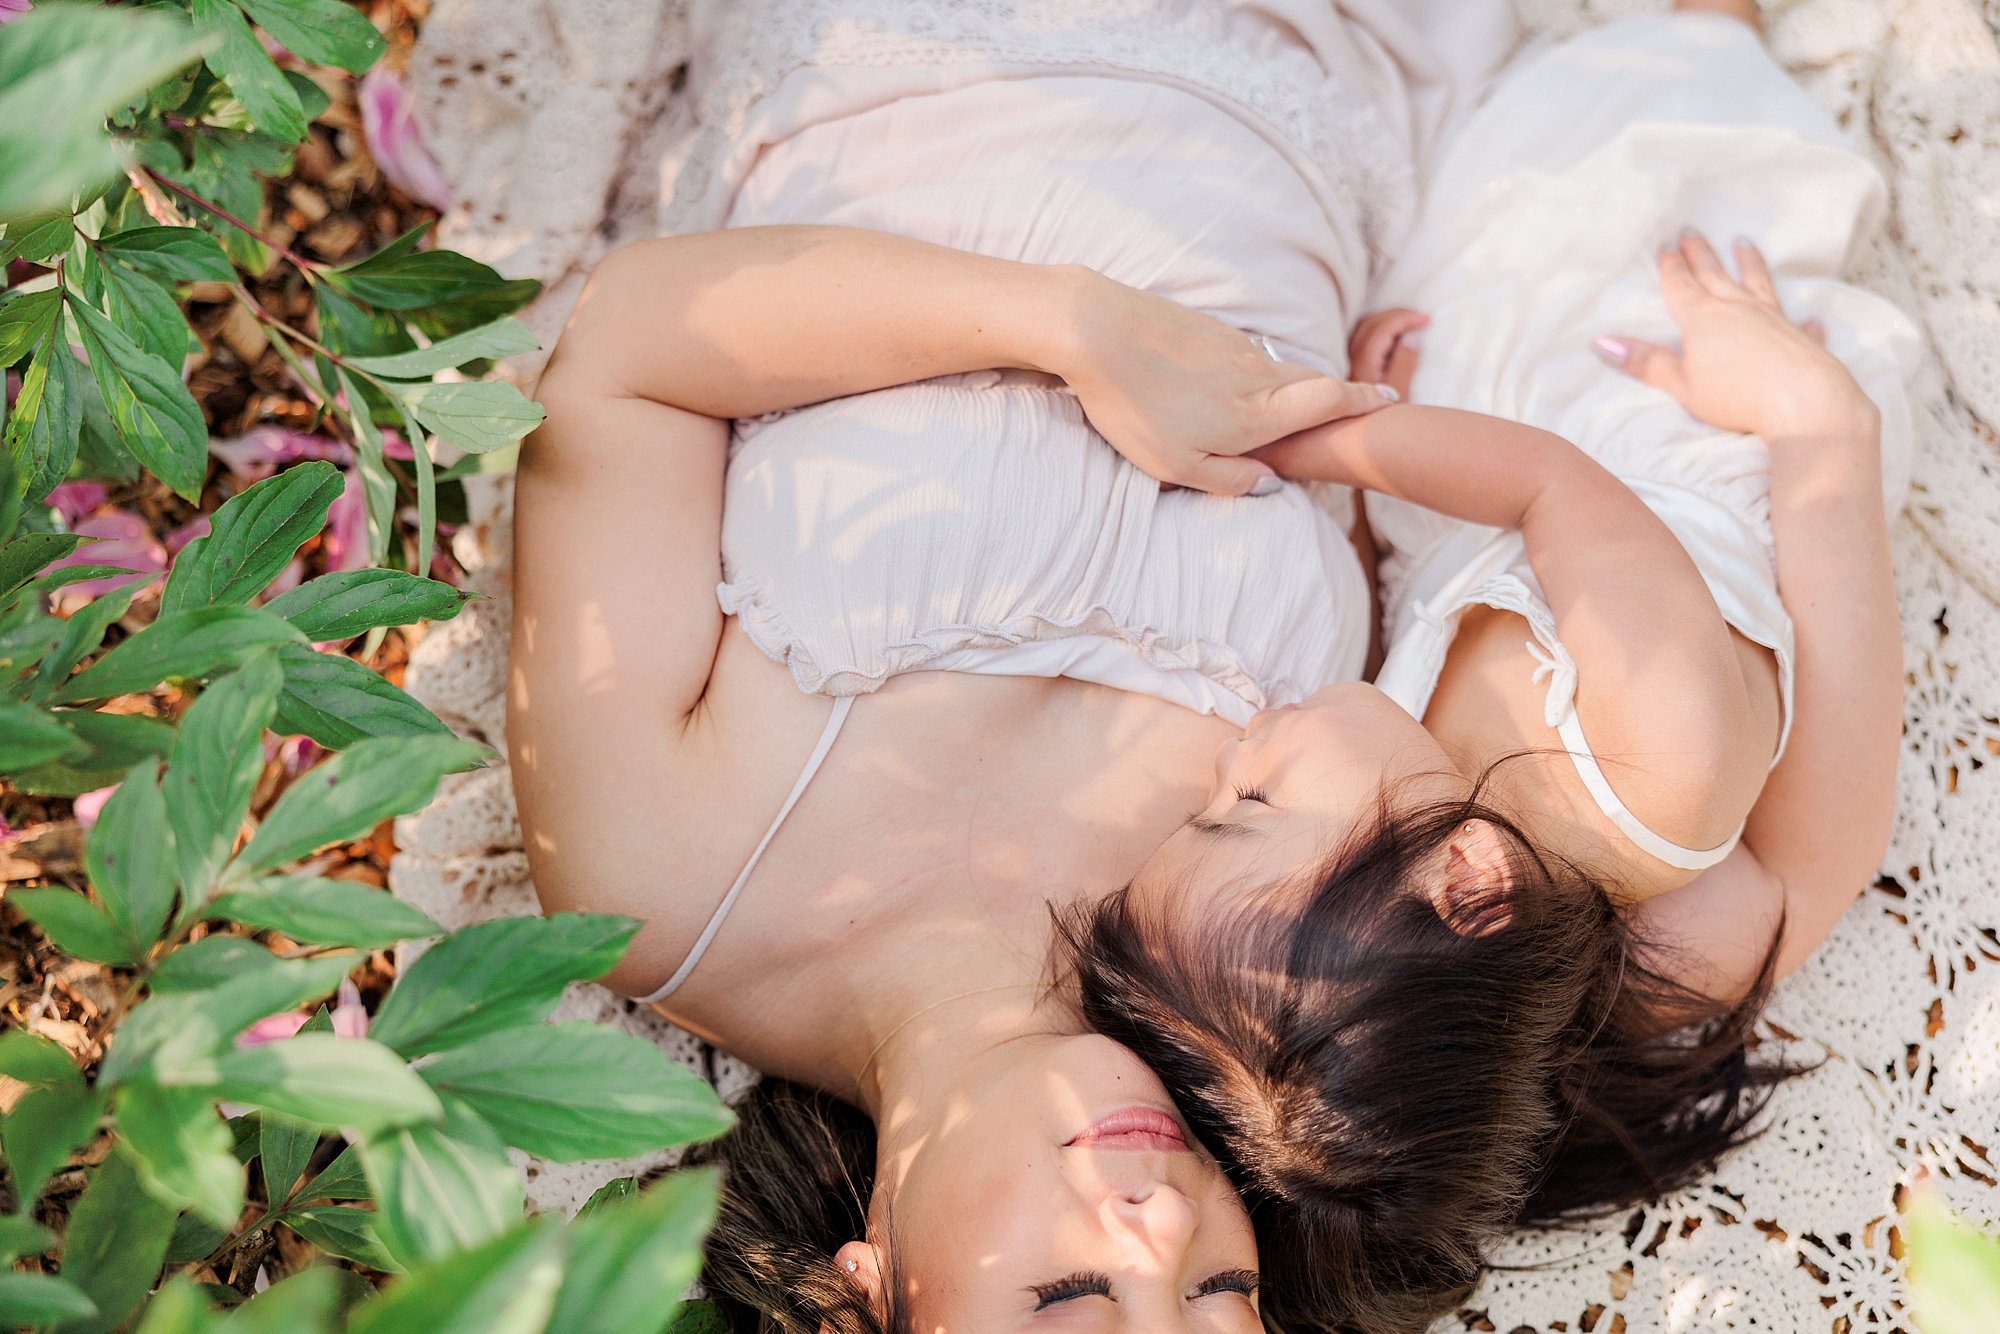 mom and daughter lay together during mommy & me photos in Gaithersburg garden